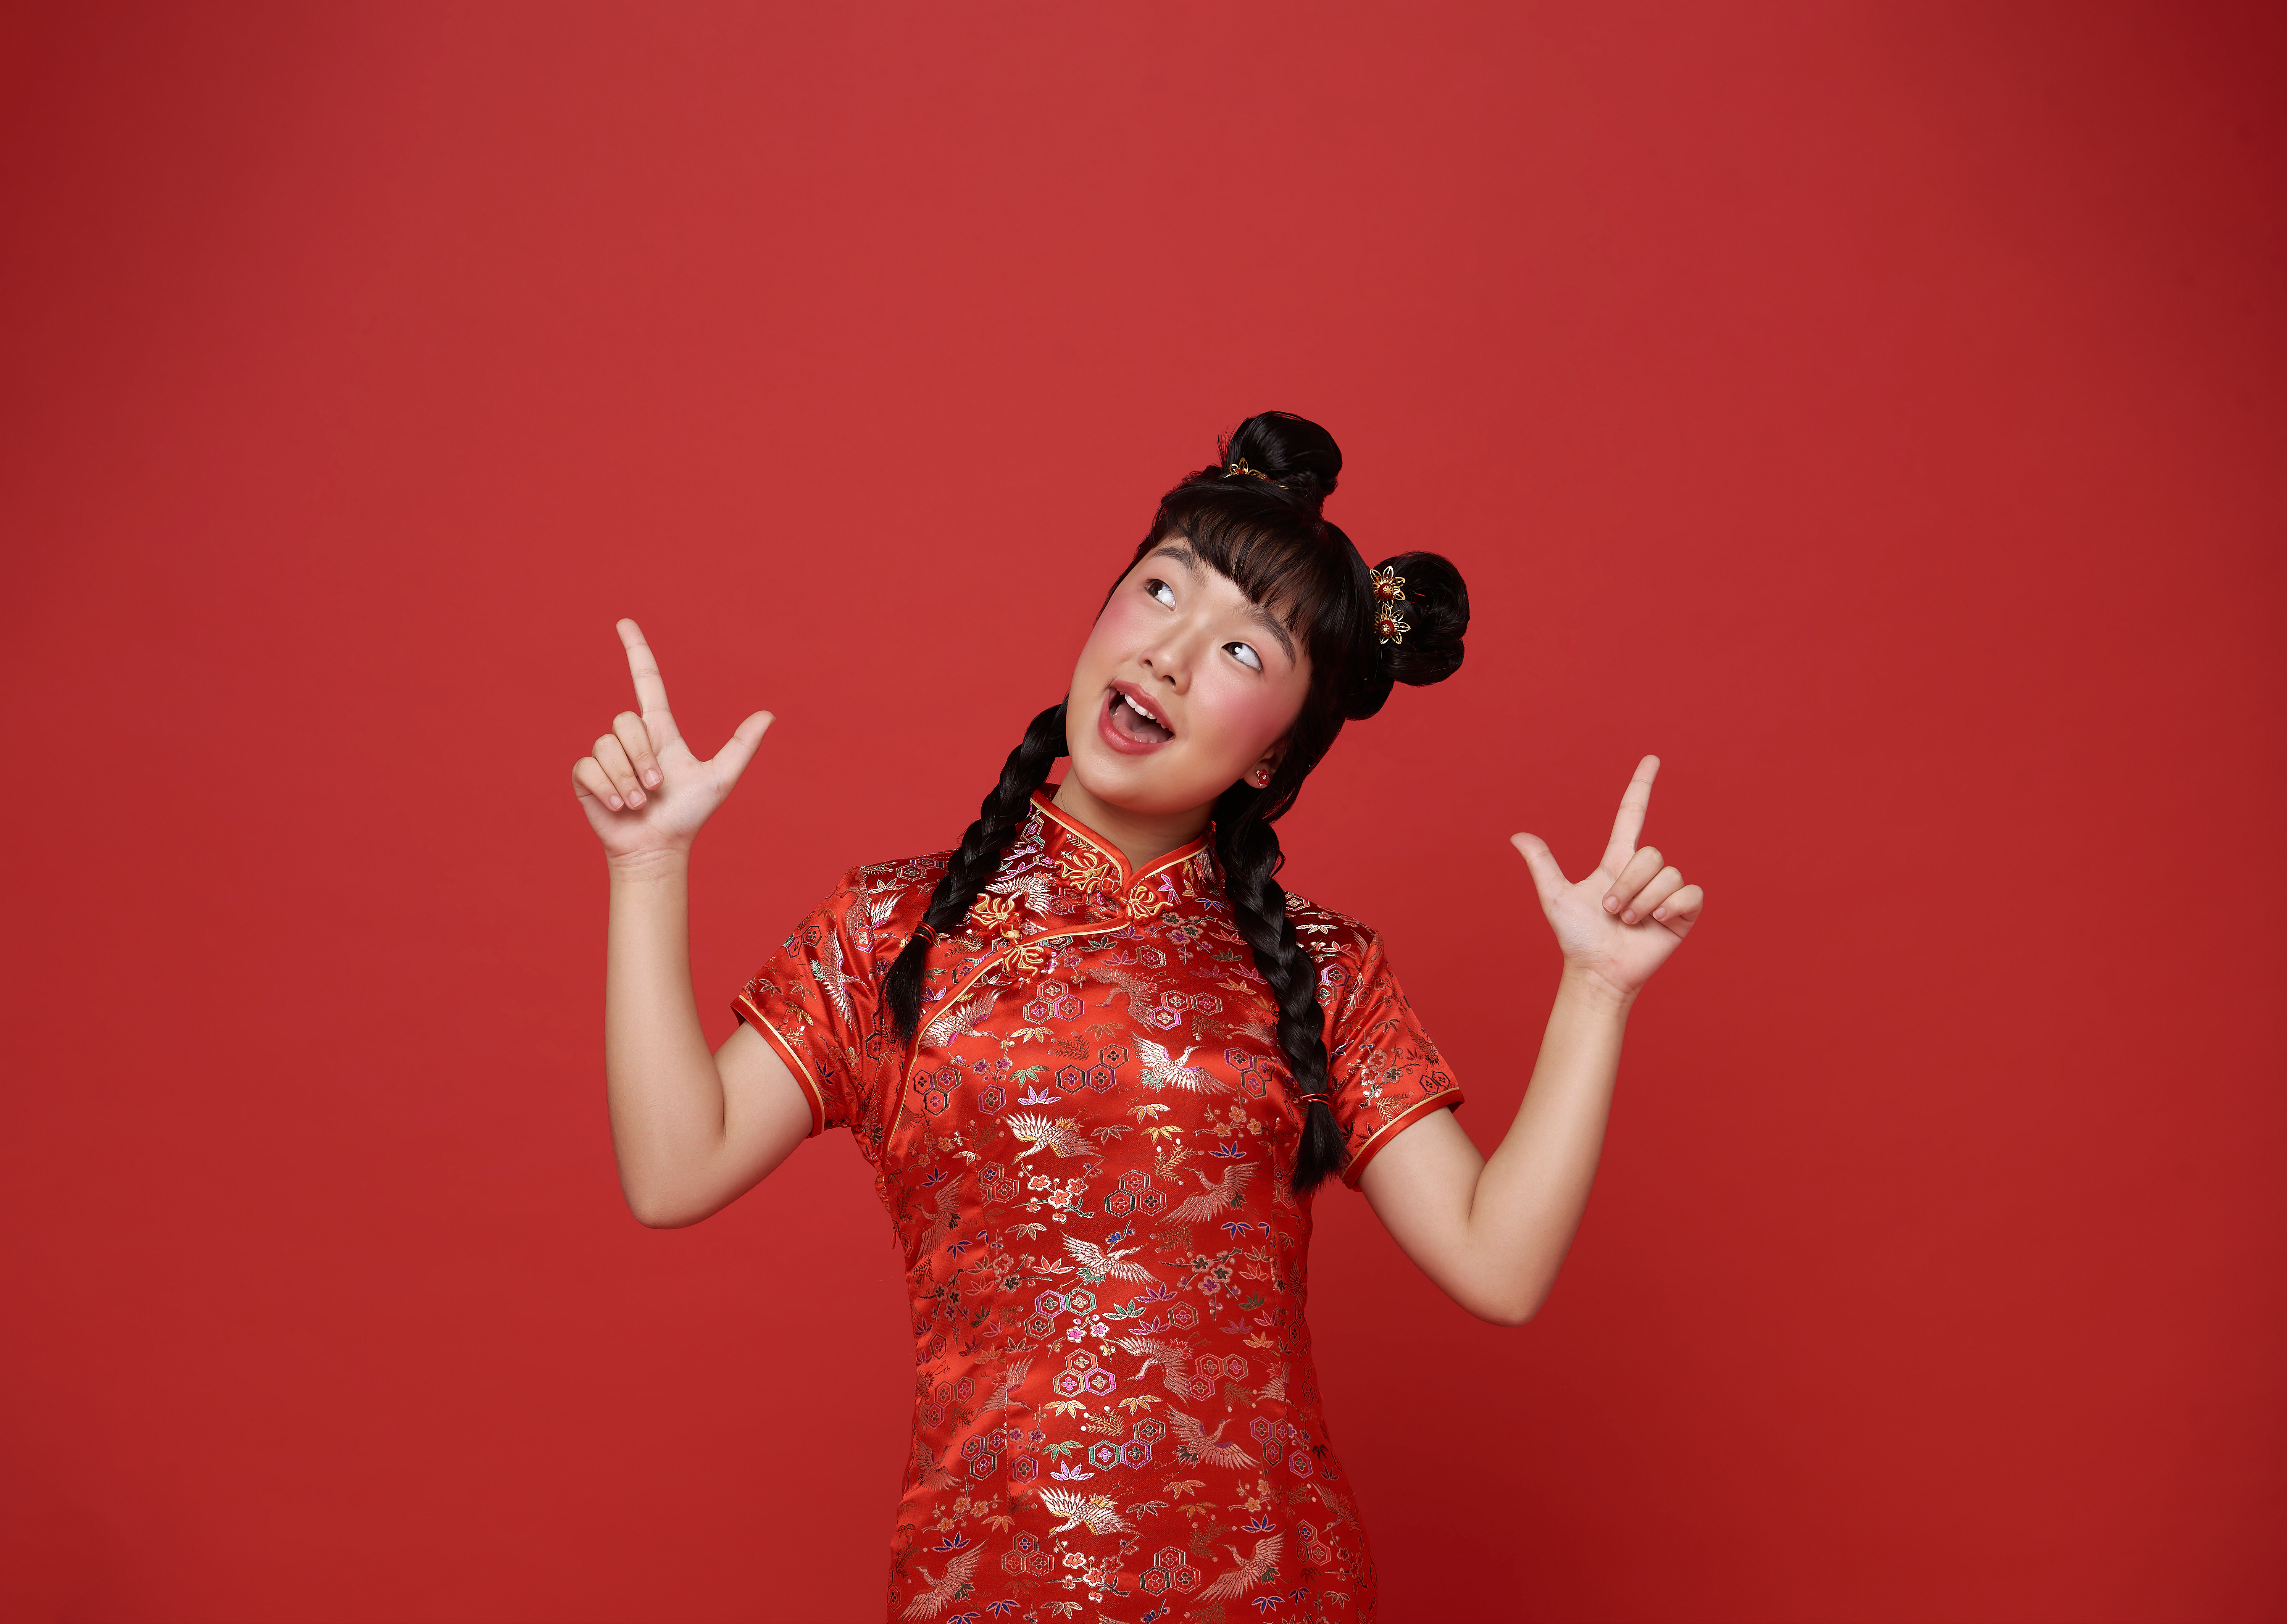 Chinese girl wearing a red, traditional Chinese qipao, standing in front of a red background.